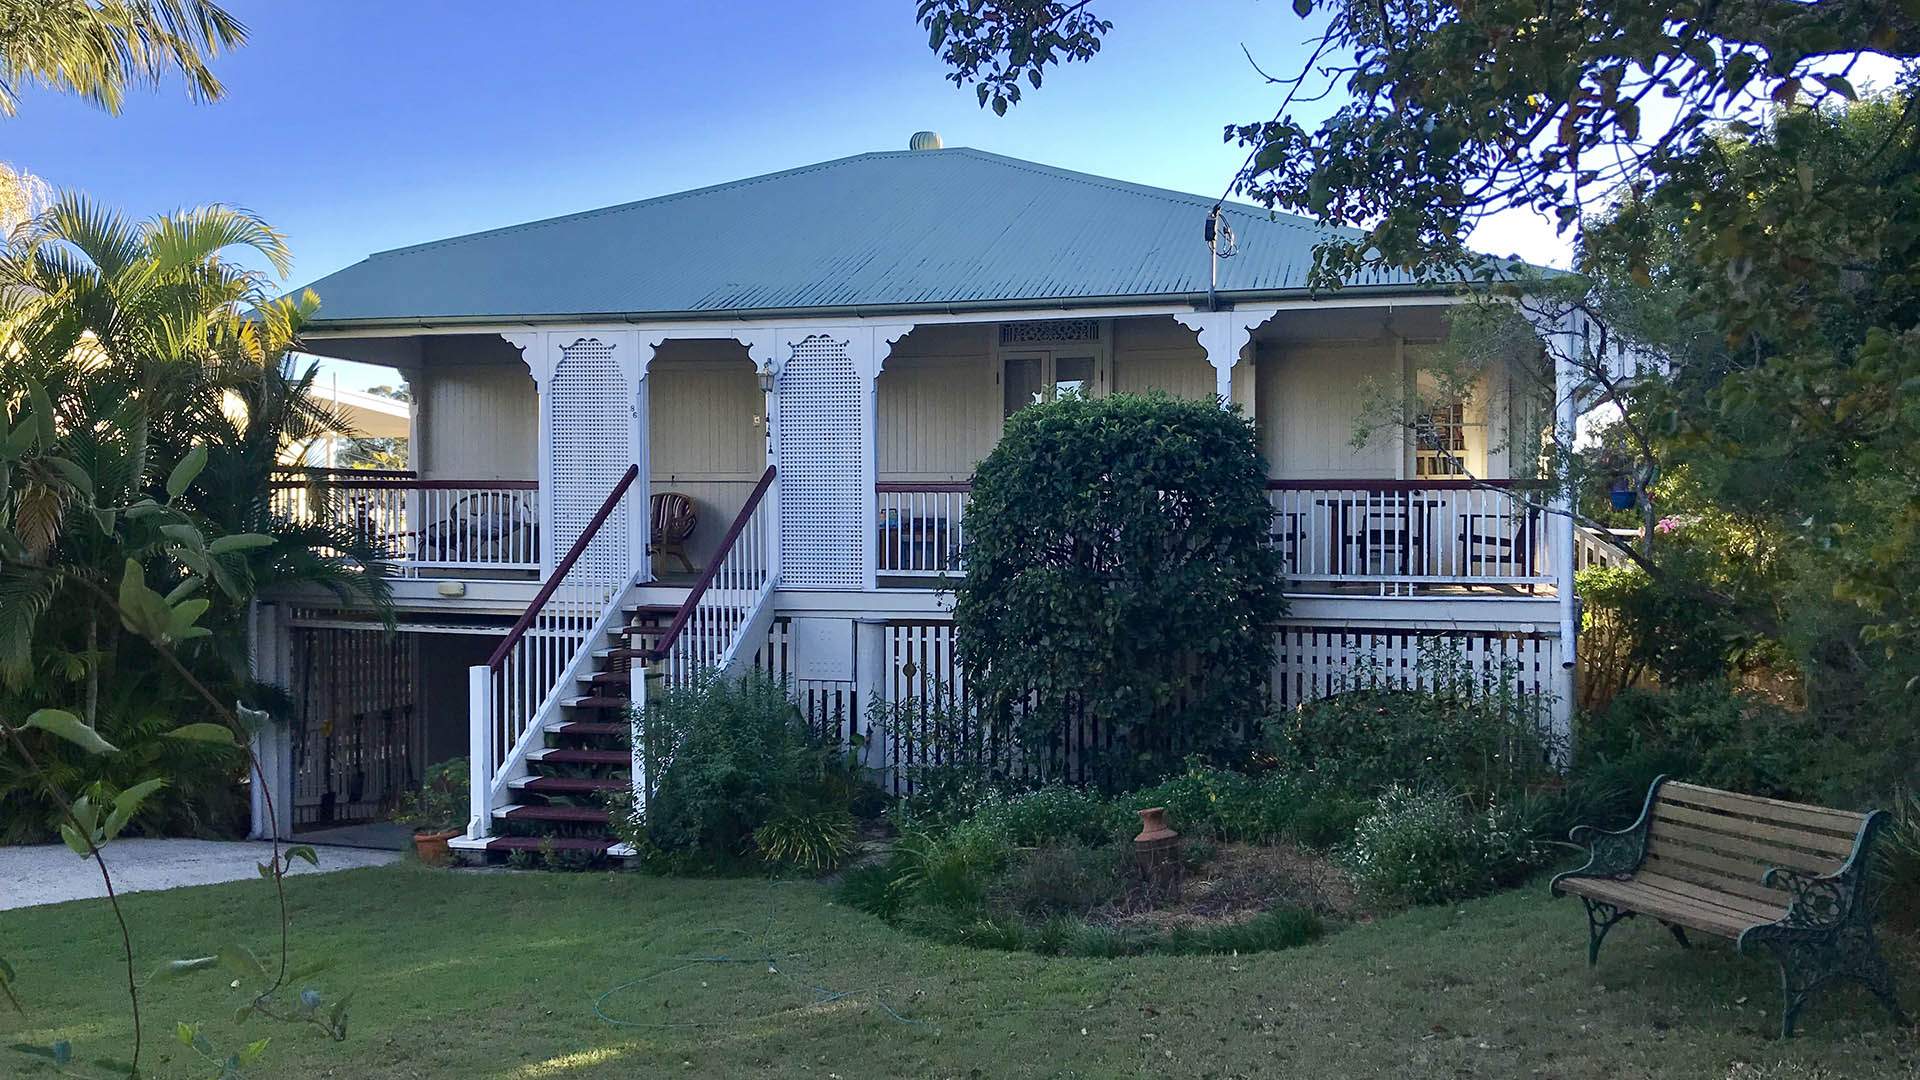 The Queensland Government's New Rental Review Could Make Renting a Home Slightly Less Painful